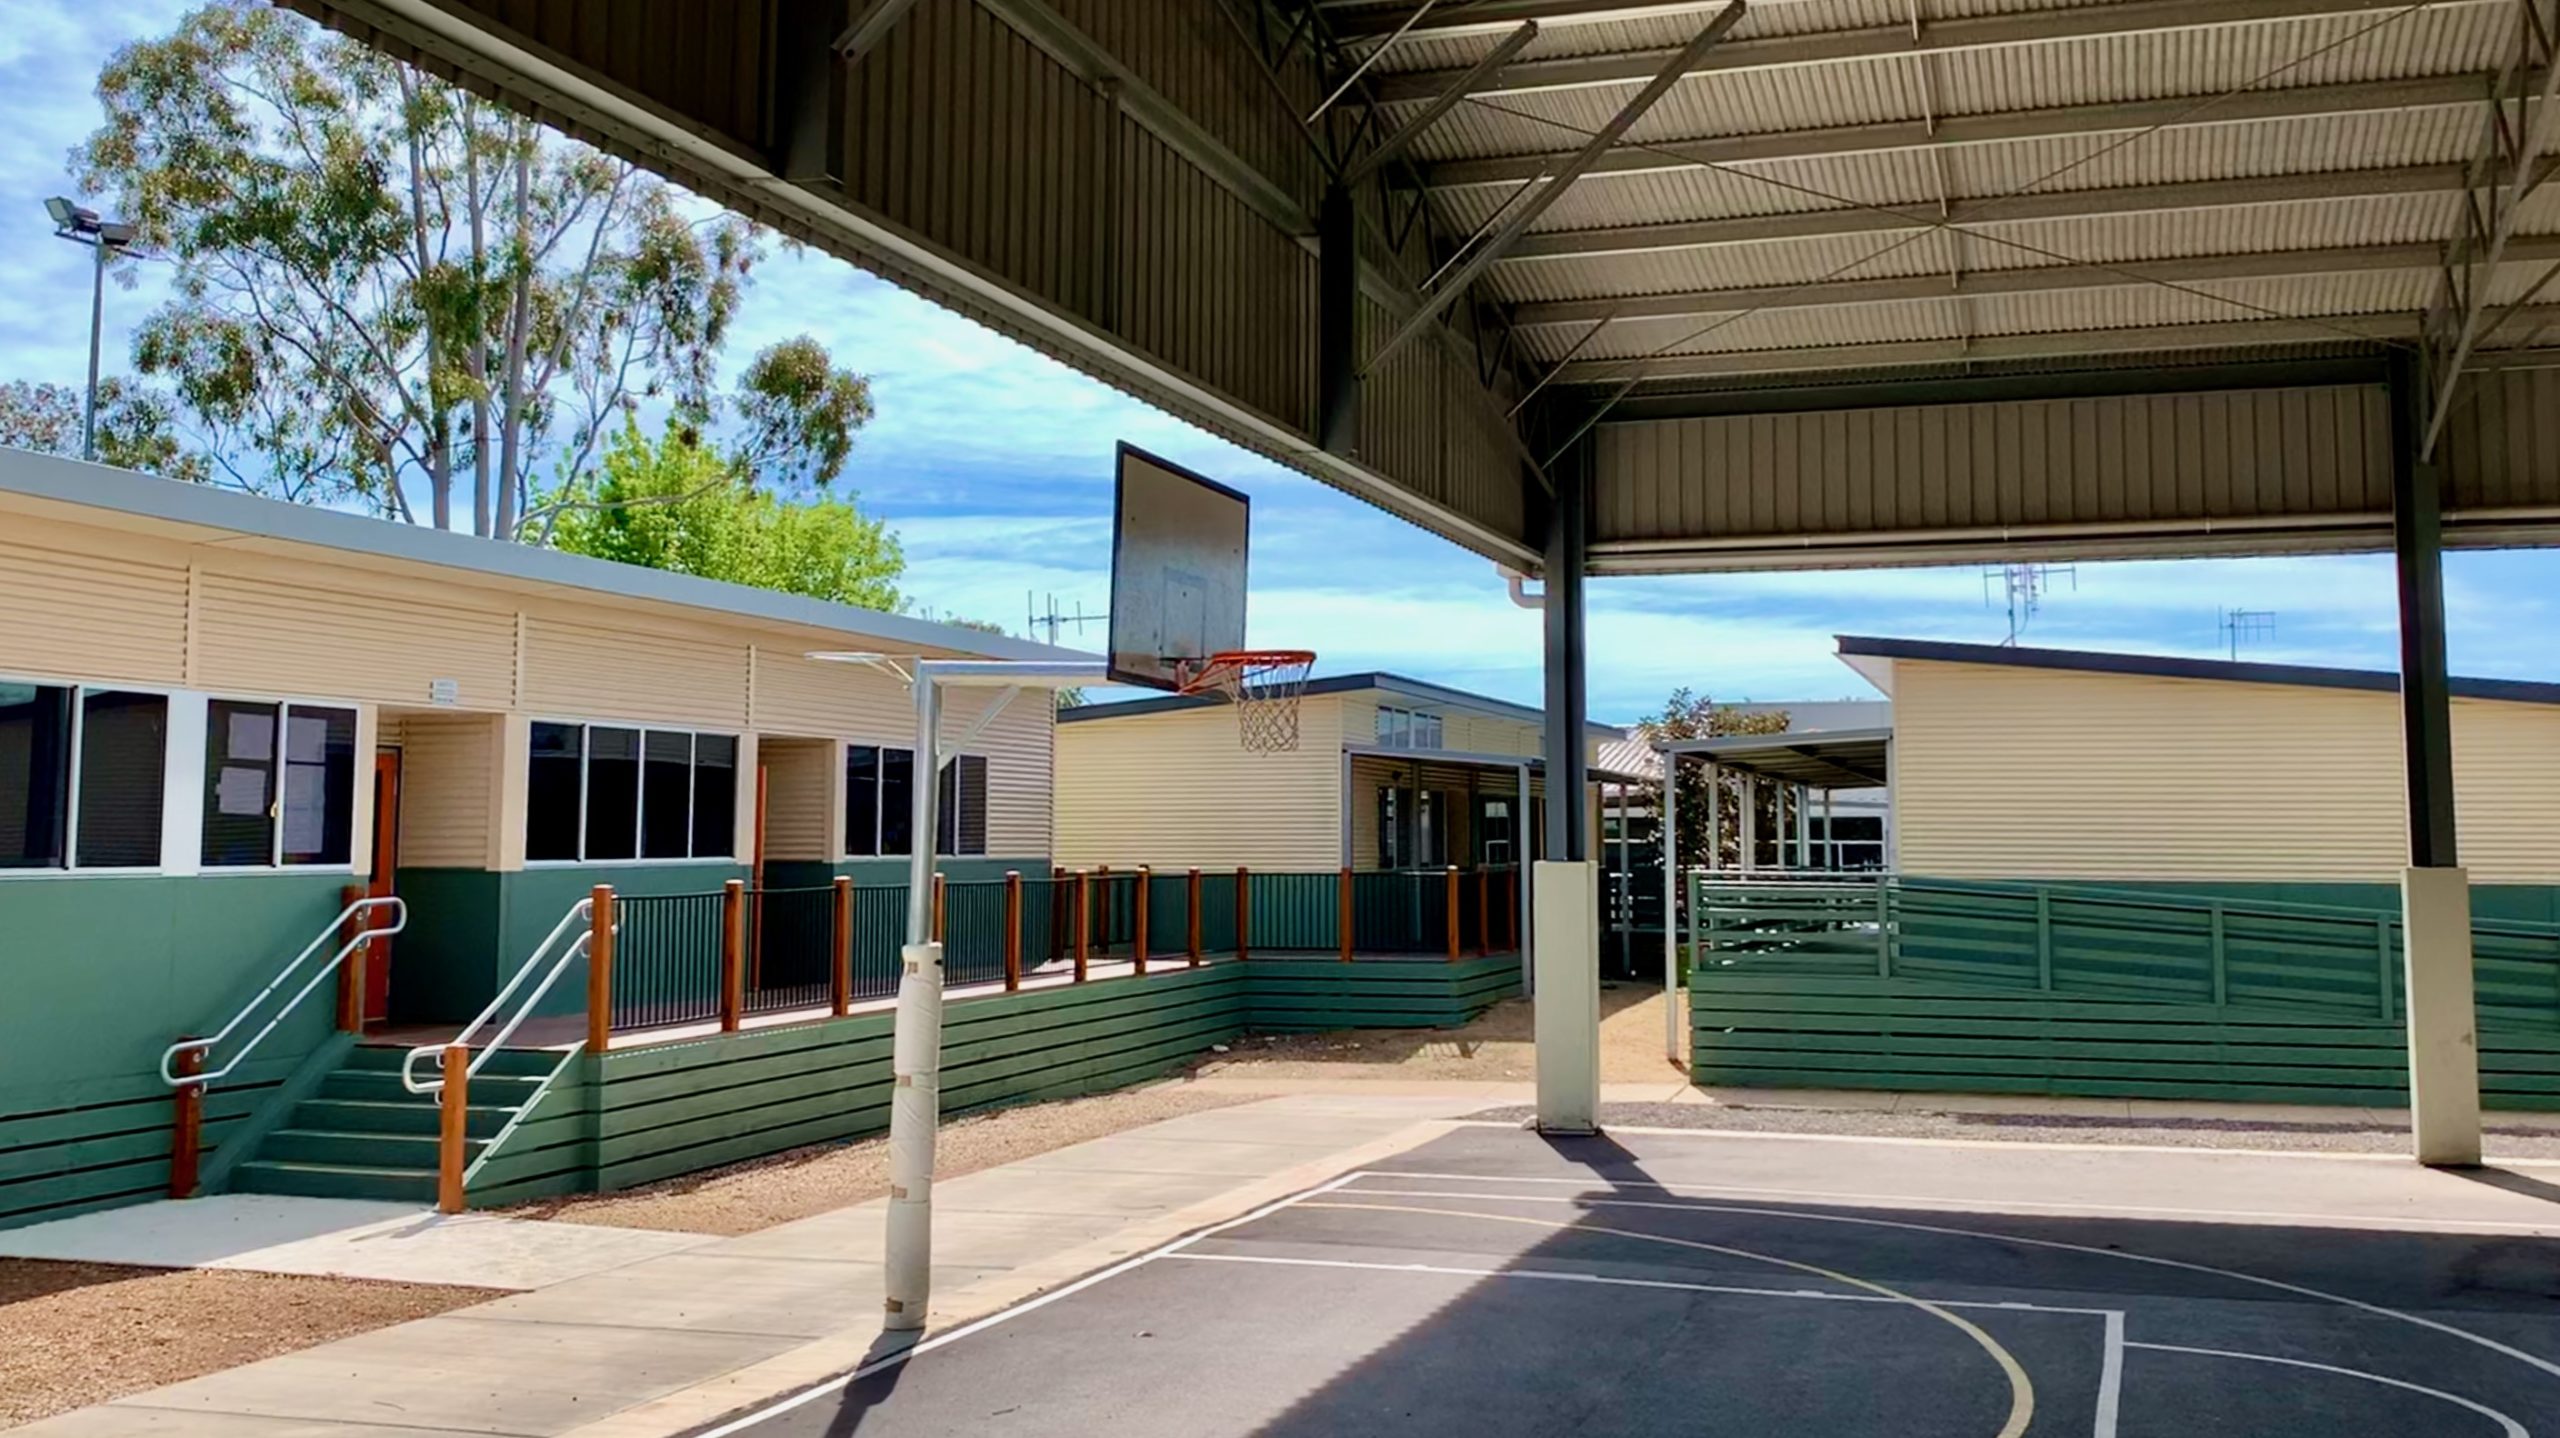 Verney Road School Classrooms & Basketball Court